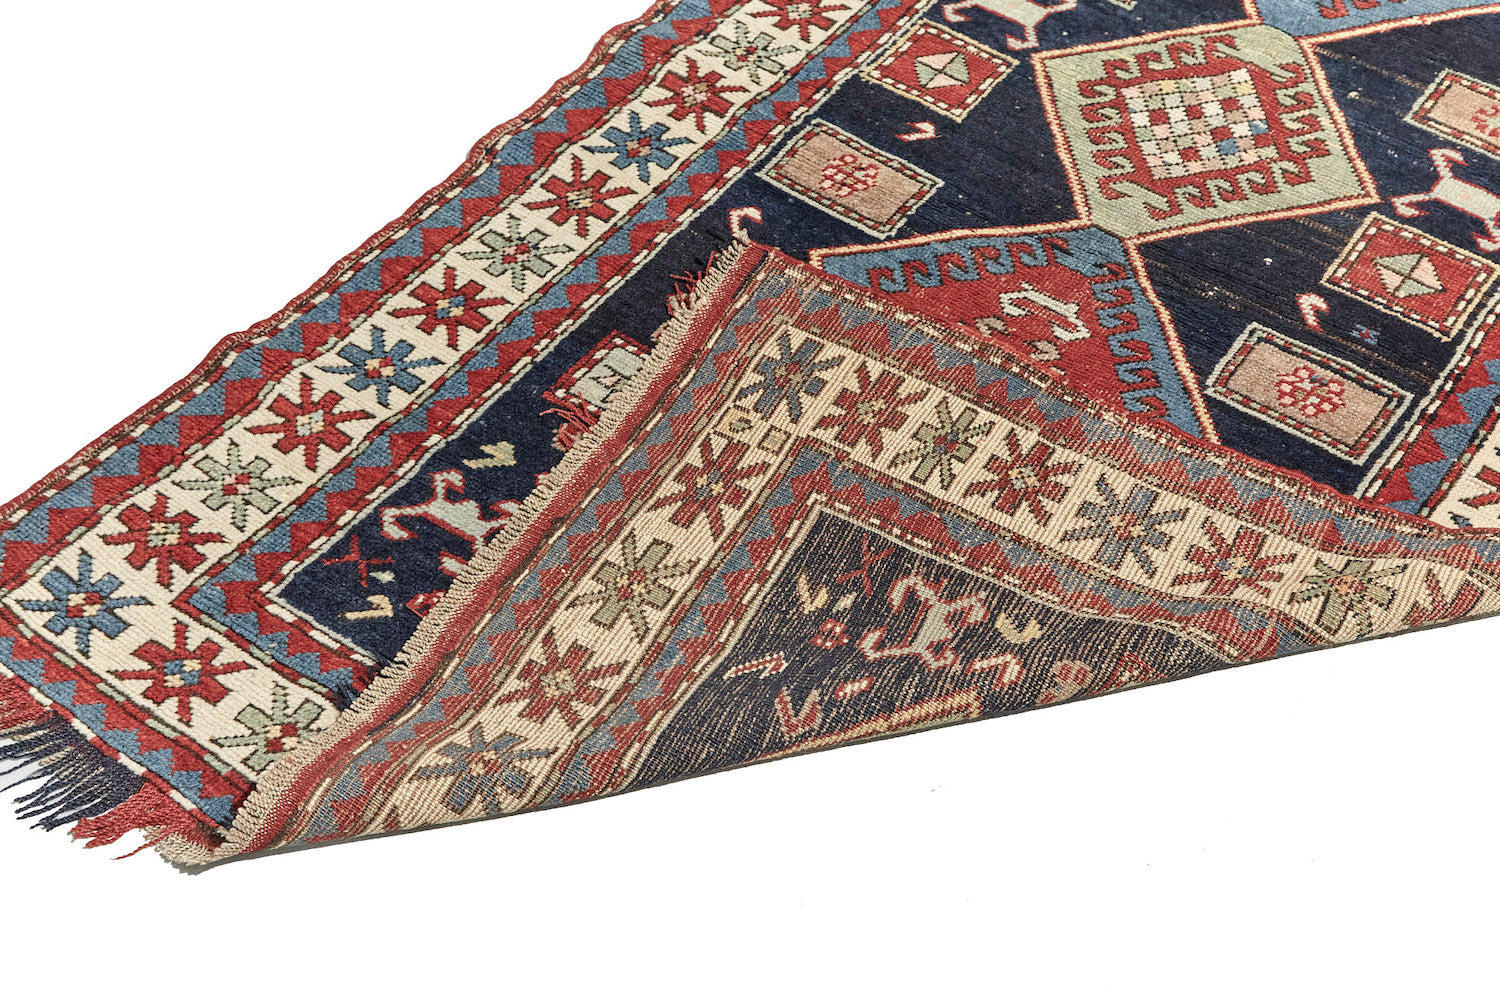 Front and back of Antique hand woven Kazak Persian rug with dark blue base, blue and pale green diamonds across center with a cream and red border, featuring red, pale green and blue star-like shapes. Perfect for bedroom, living room dining room or kitchen. Available from King Kennedy Rugs Los Angeles.